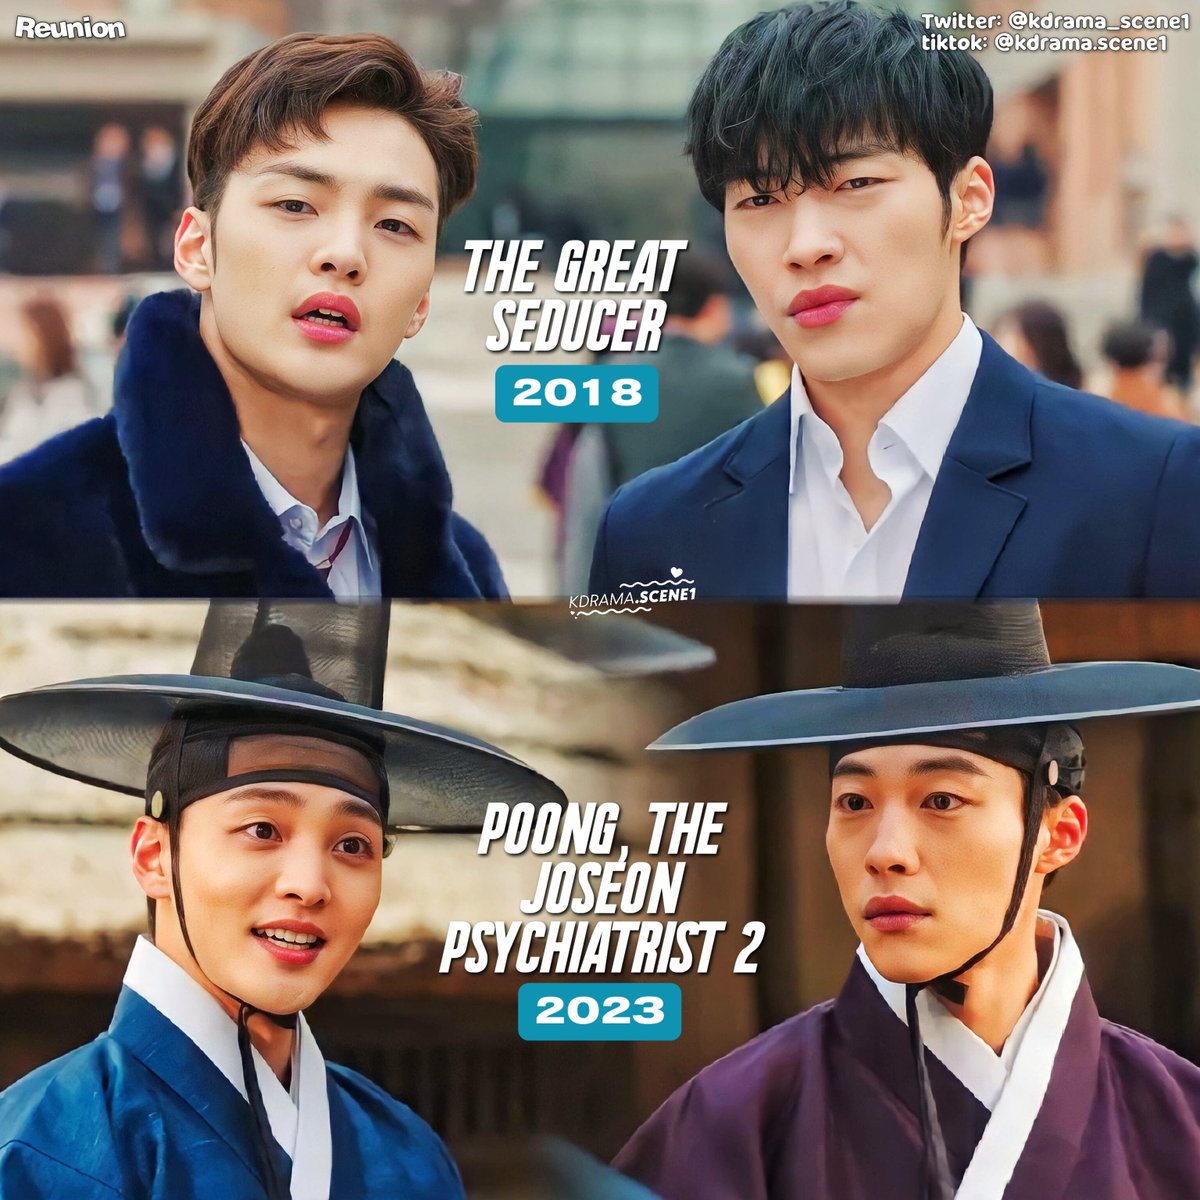 #KimMinJae and #WooDoHwan reunite in #PoongtheJoseonPsychiatrist2, both worked together in the 2018 drama #TheGreatSeducer